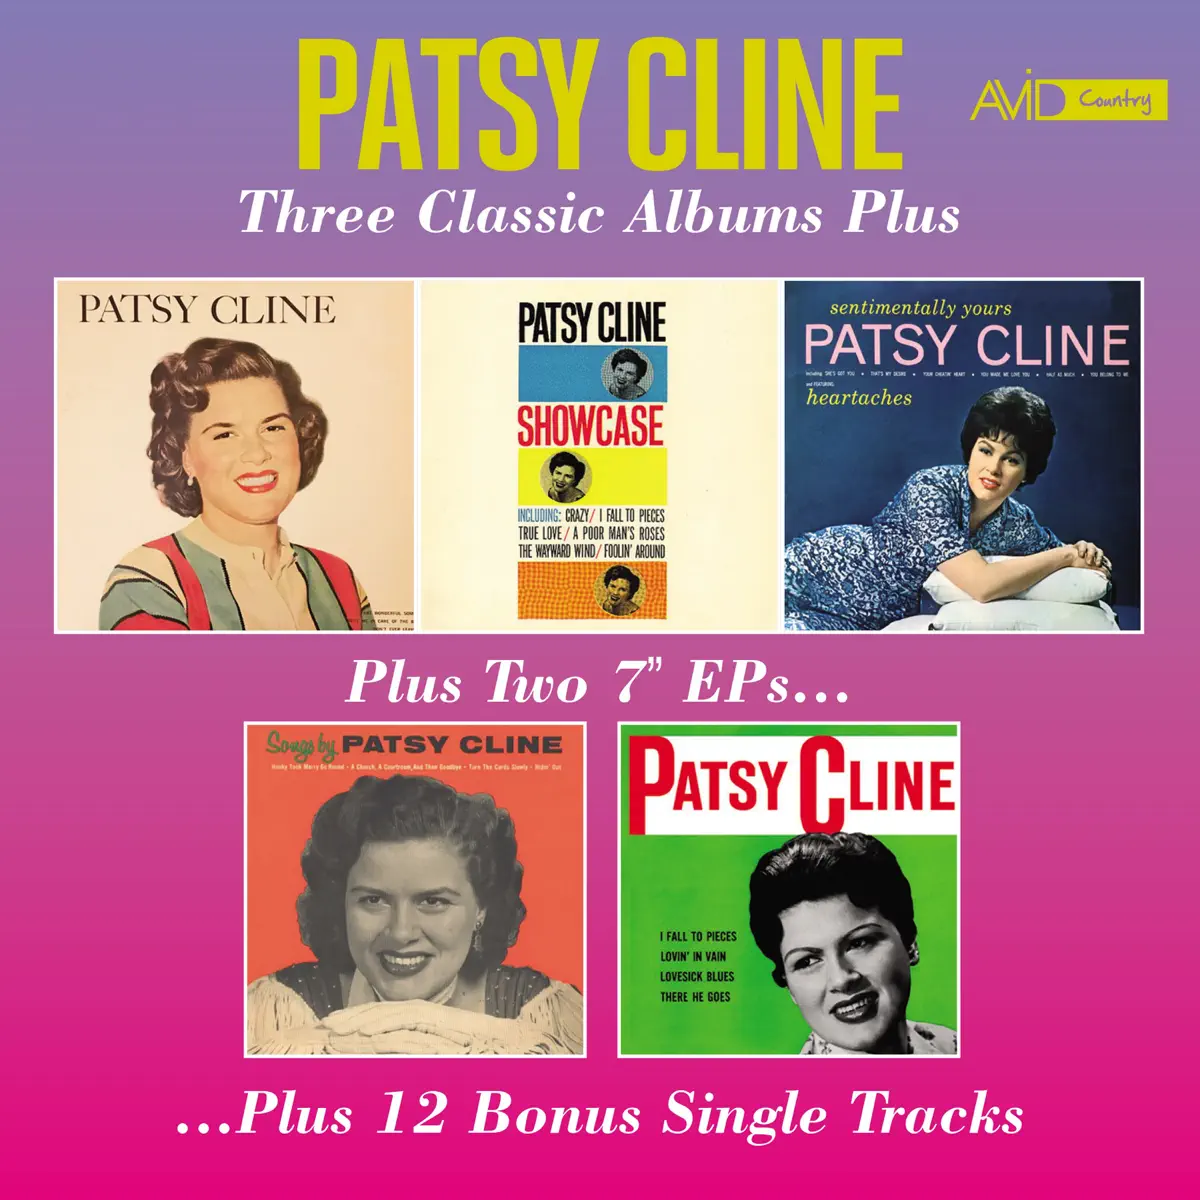 Patsy Cline - Three Classic Albums Plus (Patsy Cline / Showcase / Sentimentally Yours) (Digitally Remastered) (2018) [iTunes Plus AAC M4A]-新房子